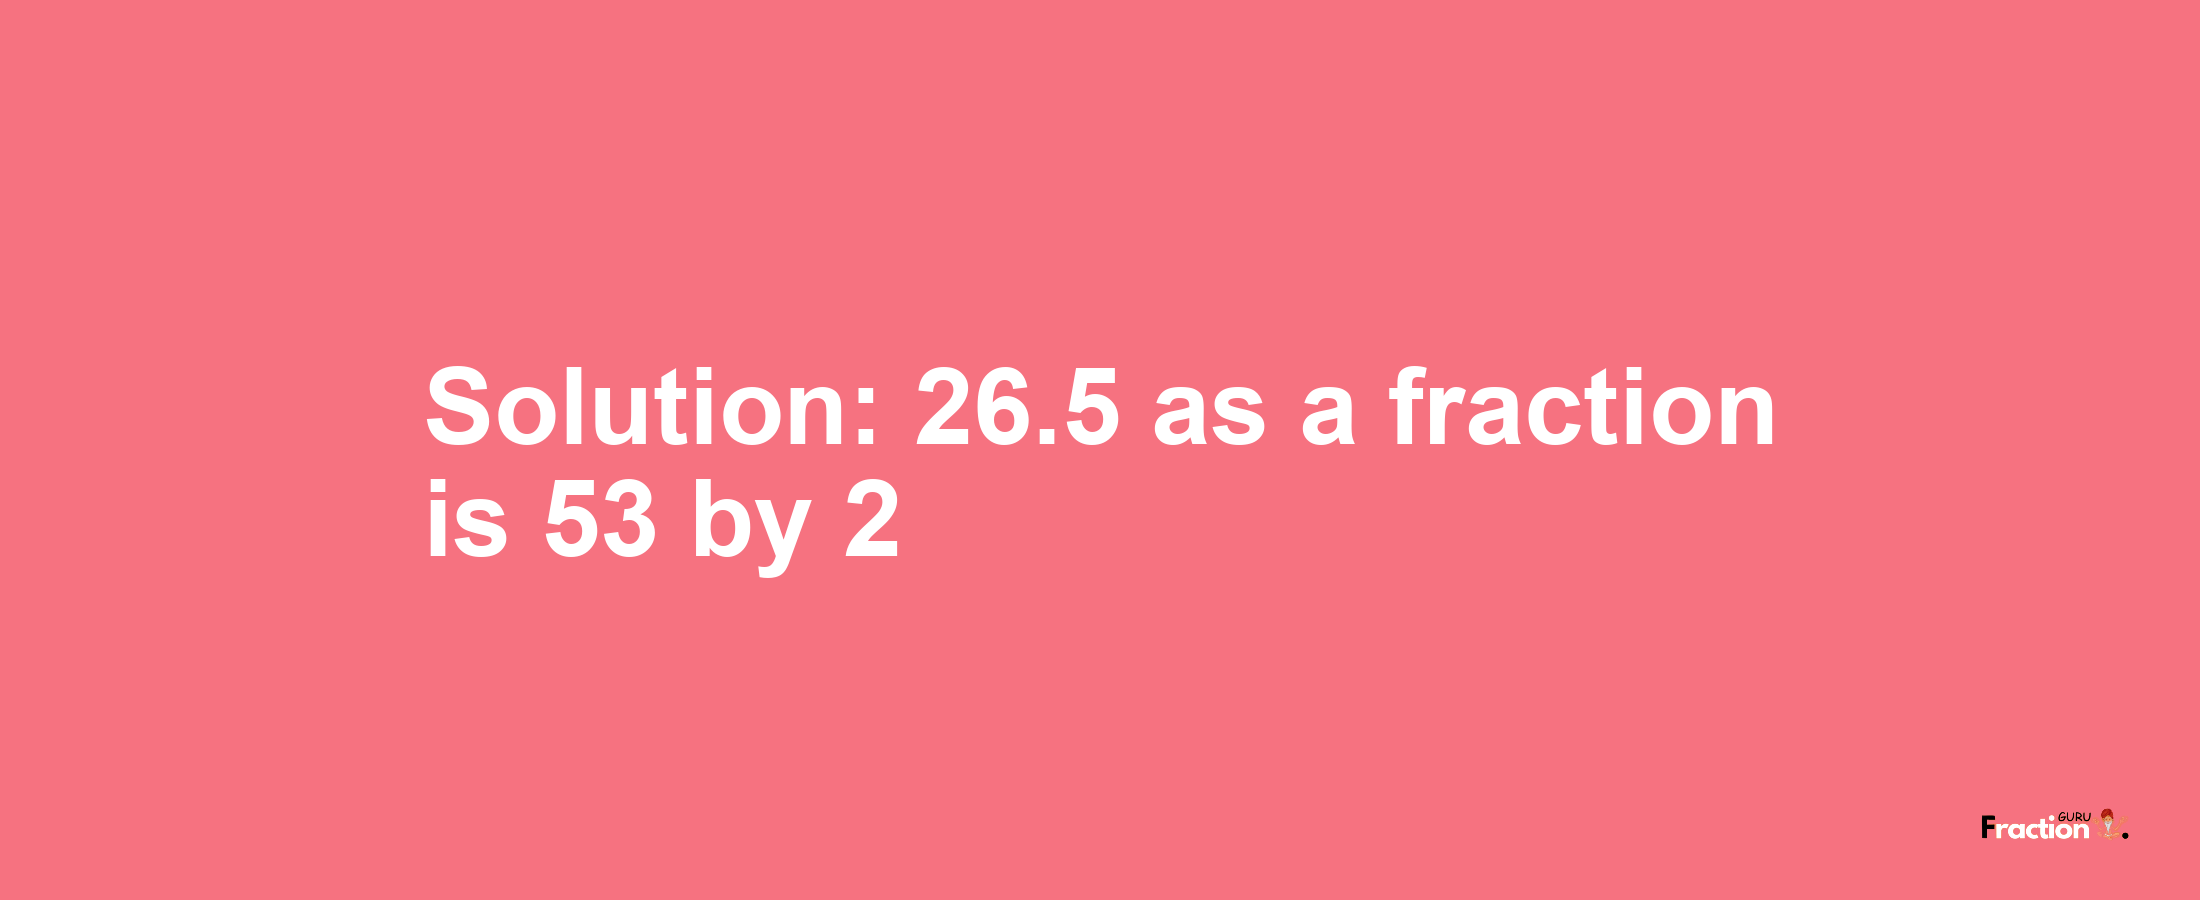 Solution:26.5 as a fraction is 53/2